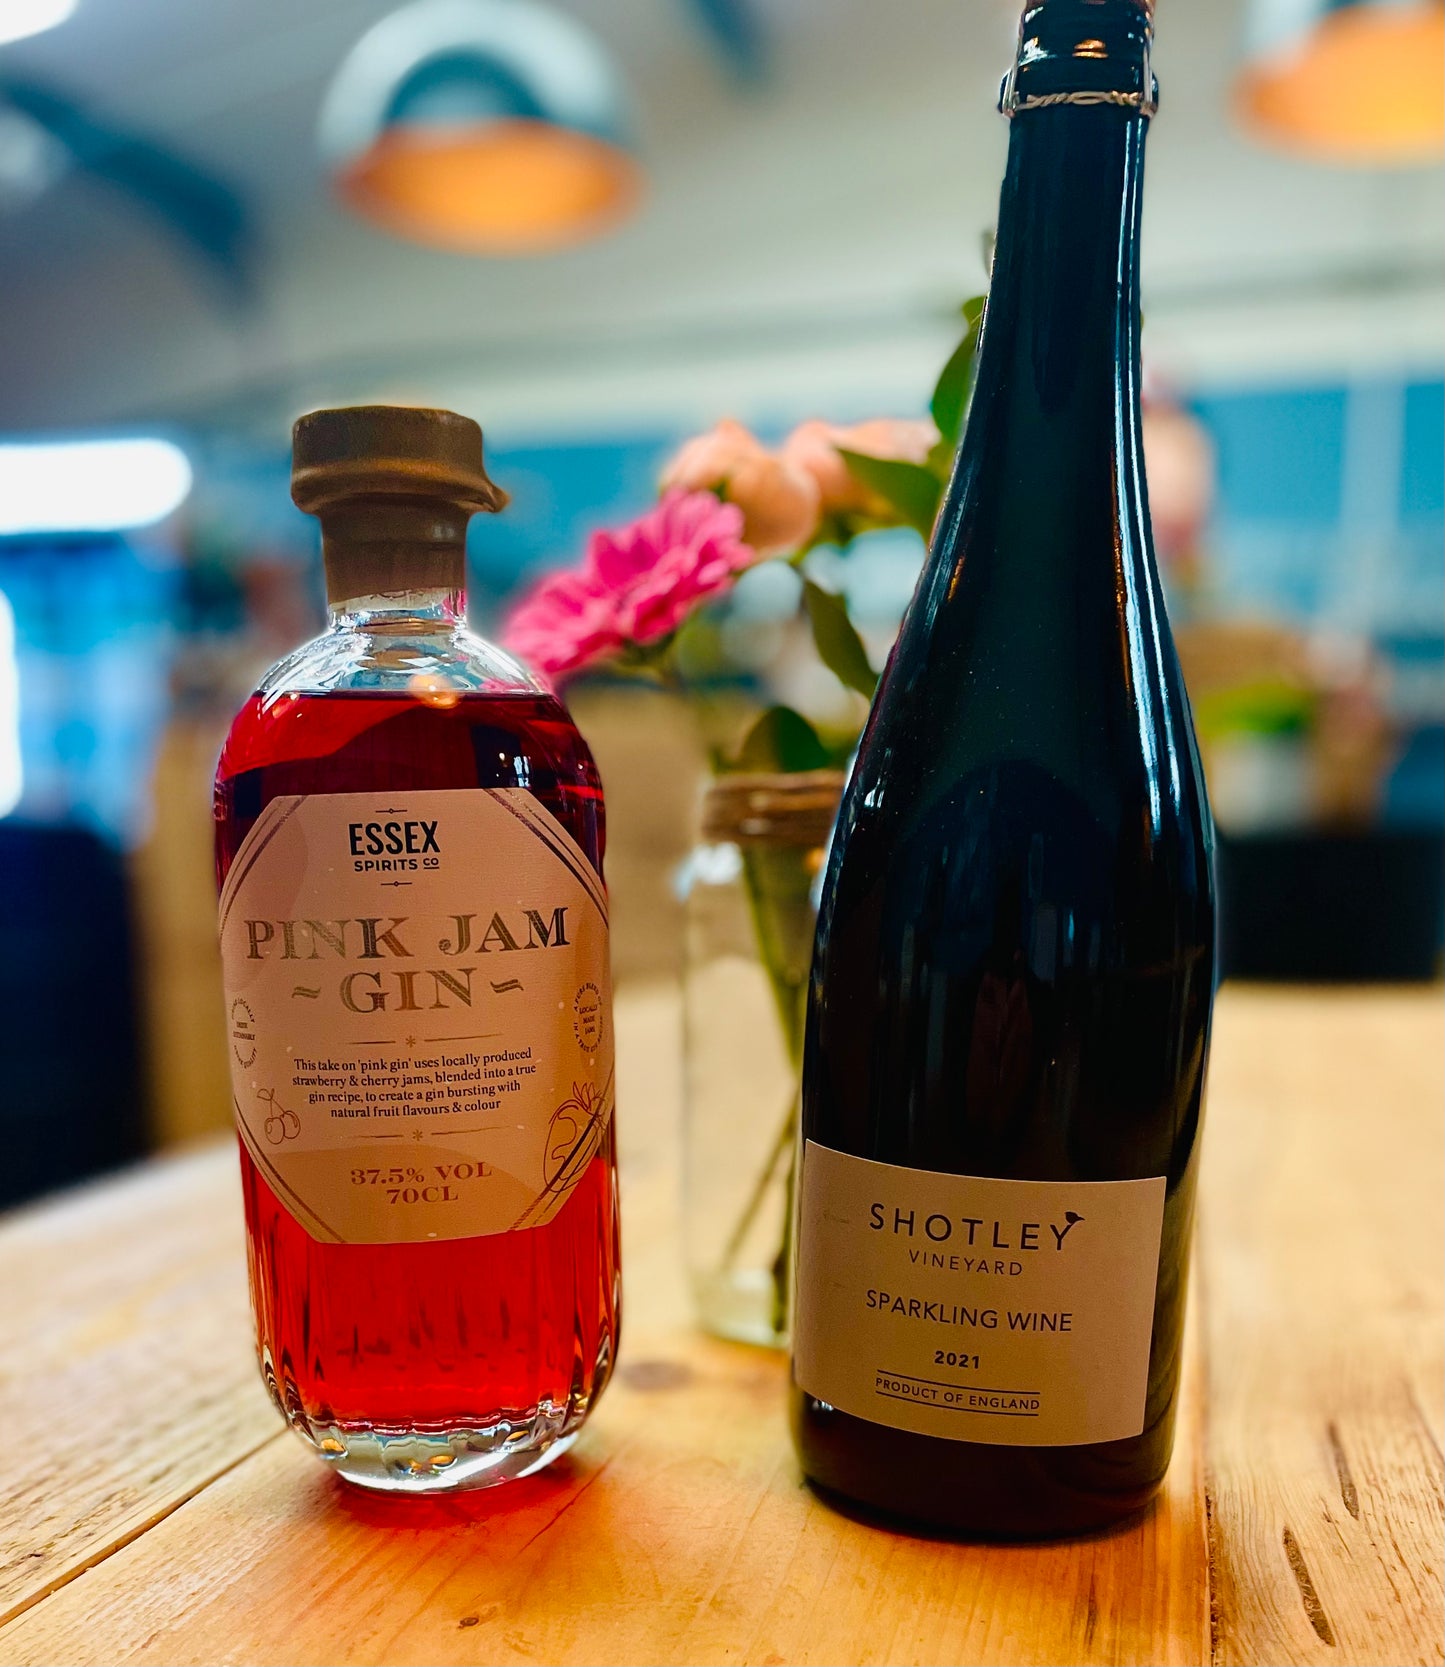 Valentine's Day bundle from Essex Spirits Co. featuring locally made Pnik Jam Gin and a bottle of Stotley Sparkling Wine